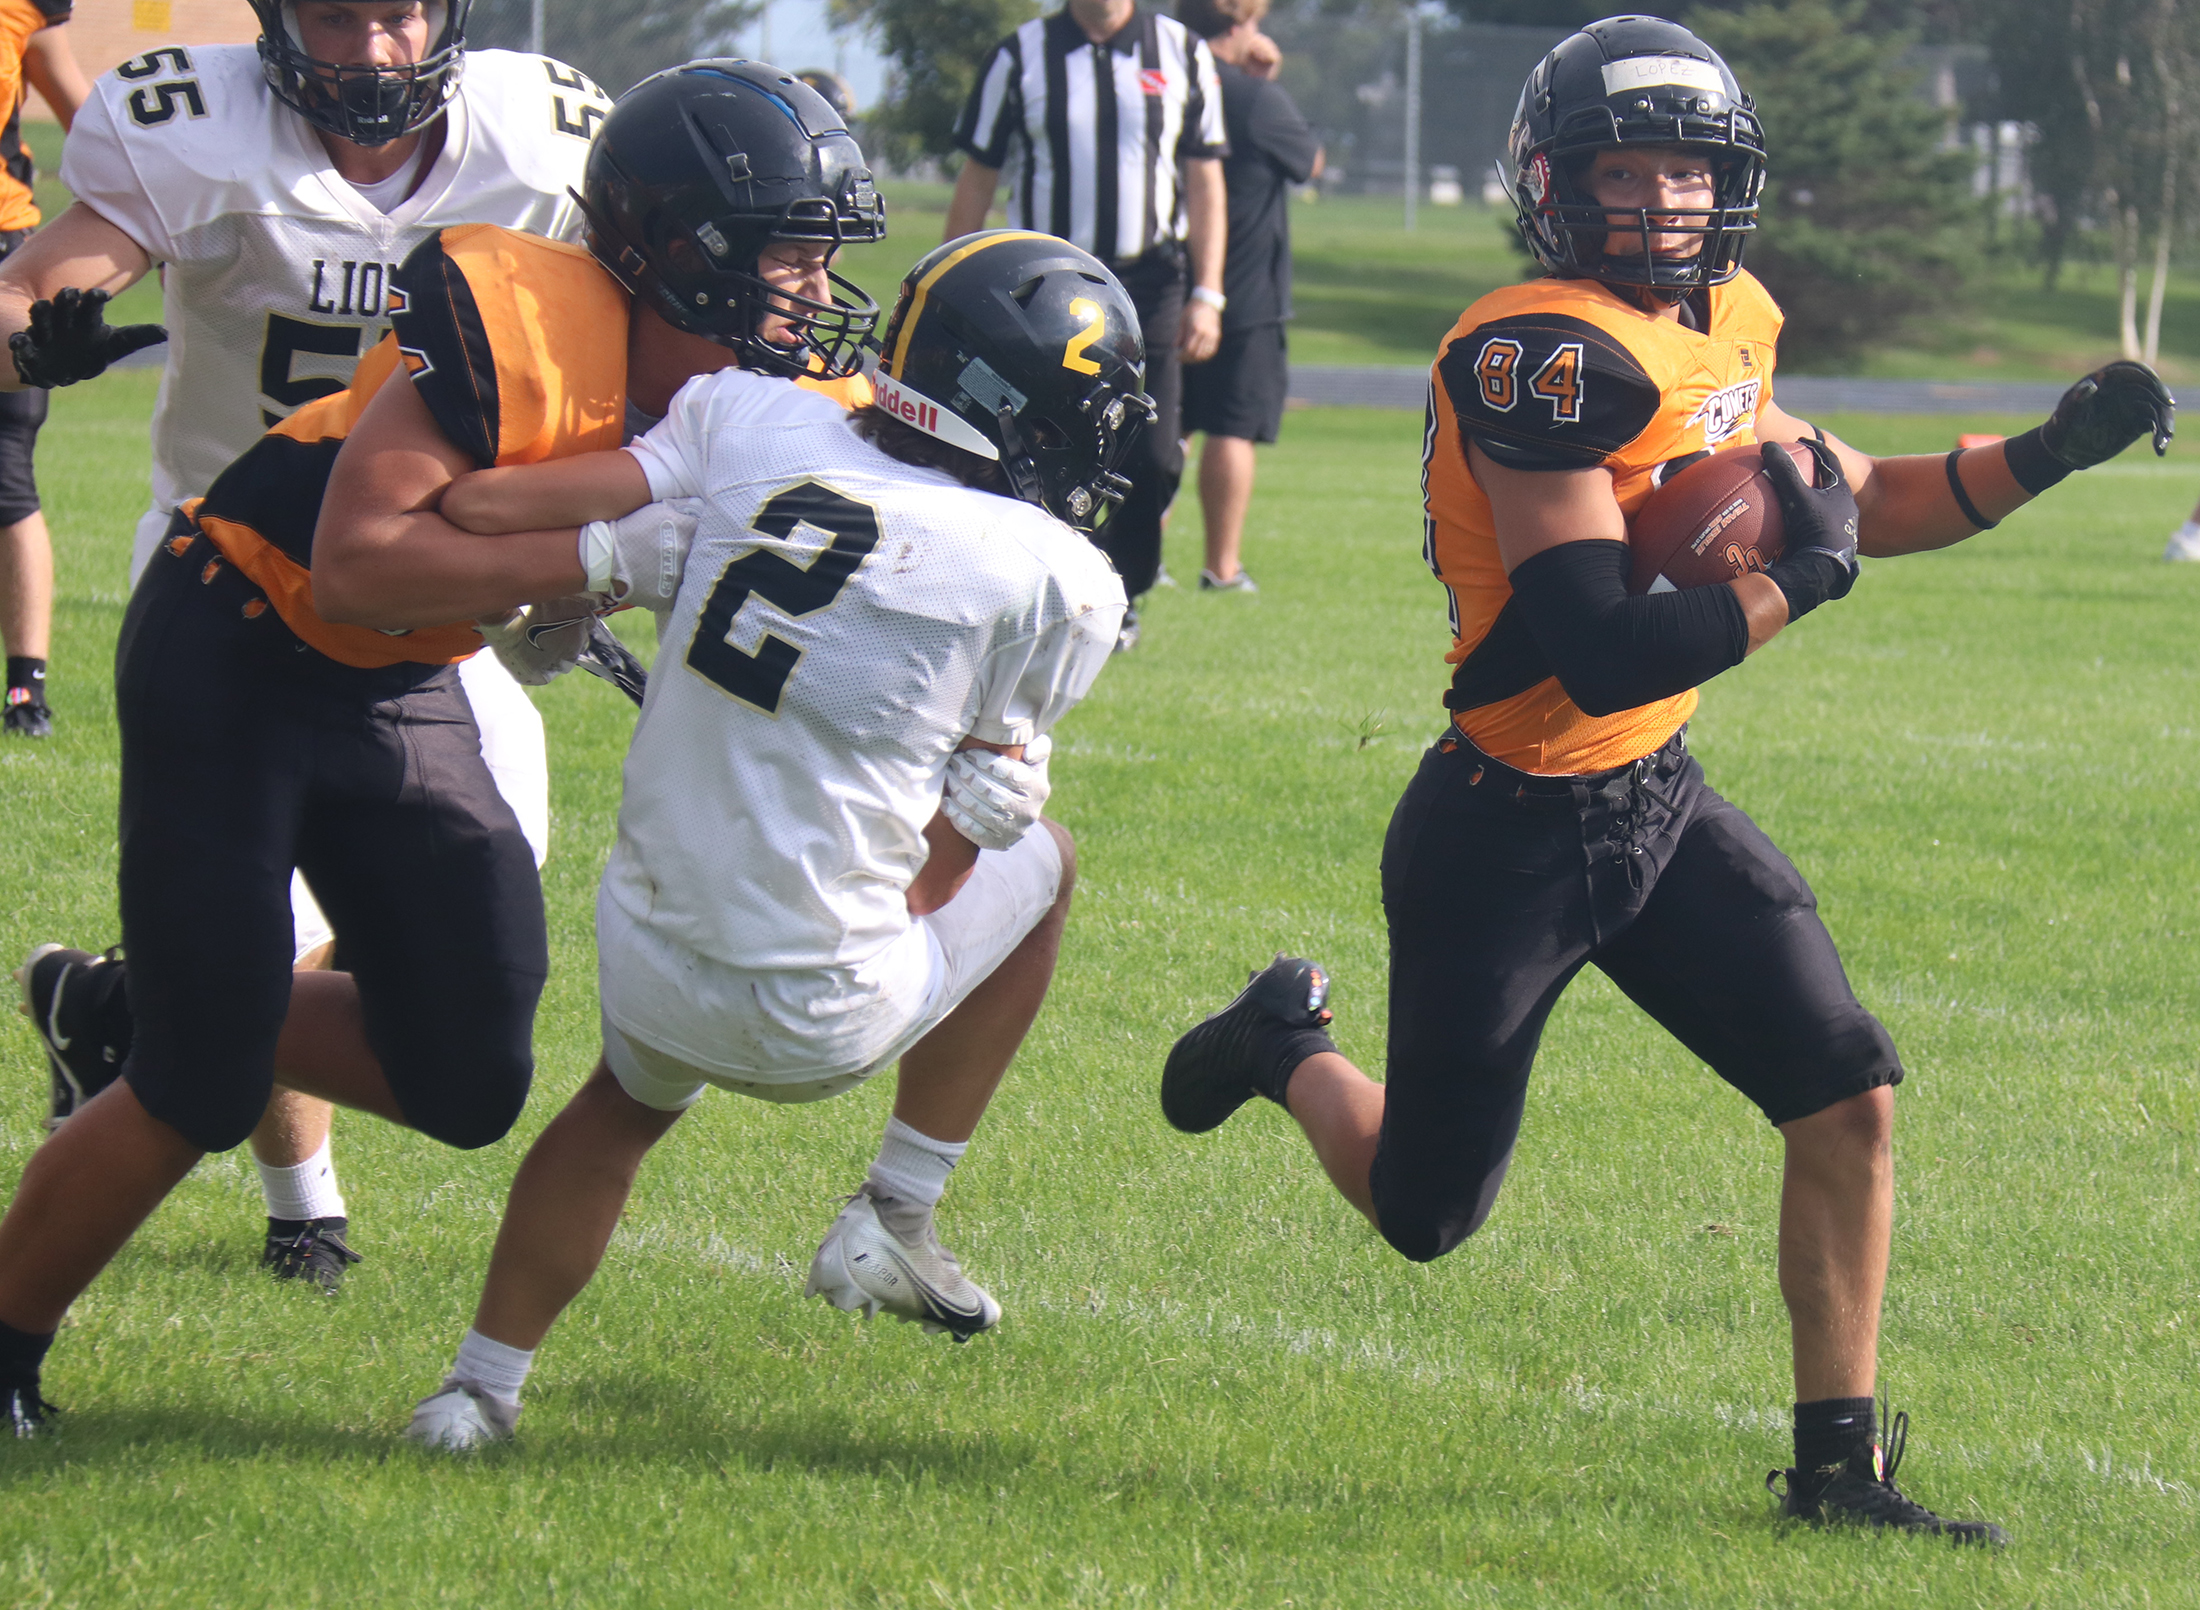 Weight-room rats shine during Comet scrimmage against Lions